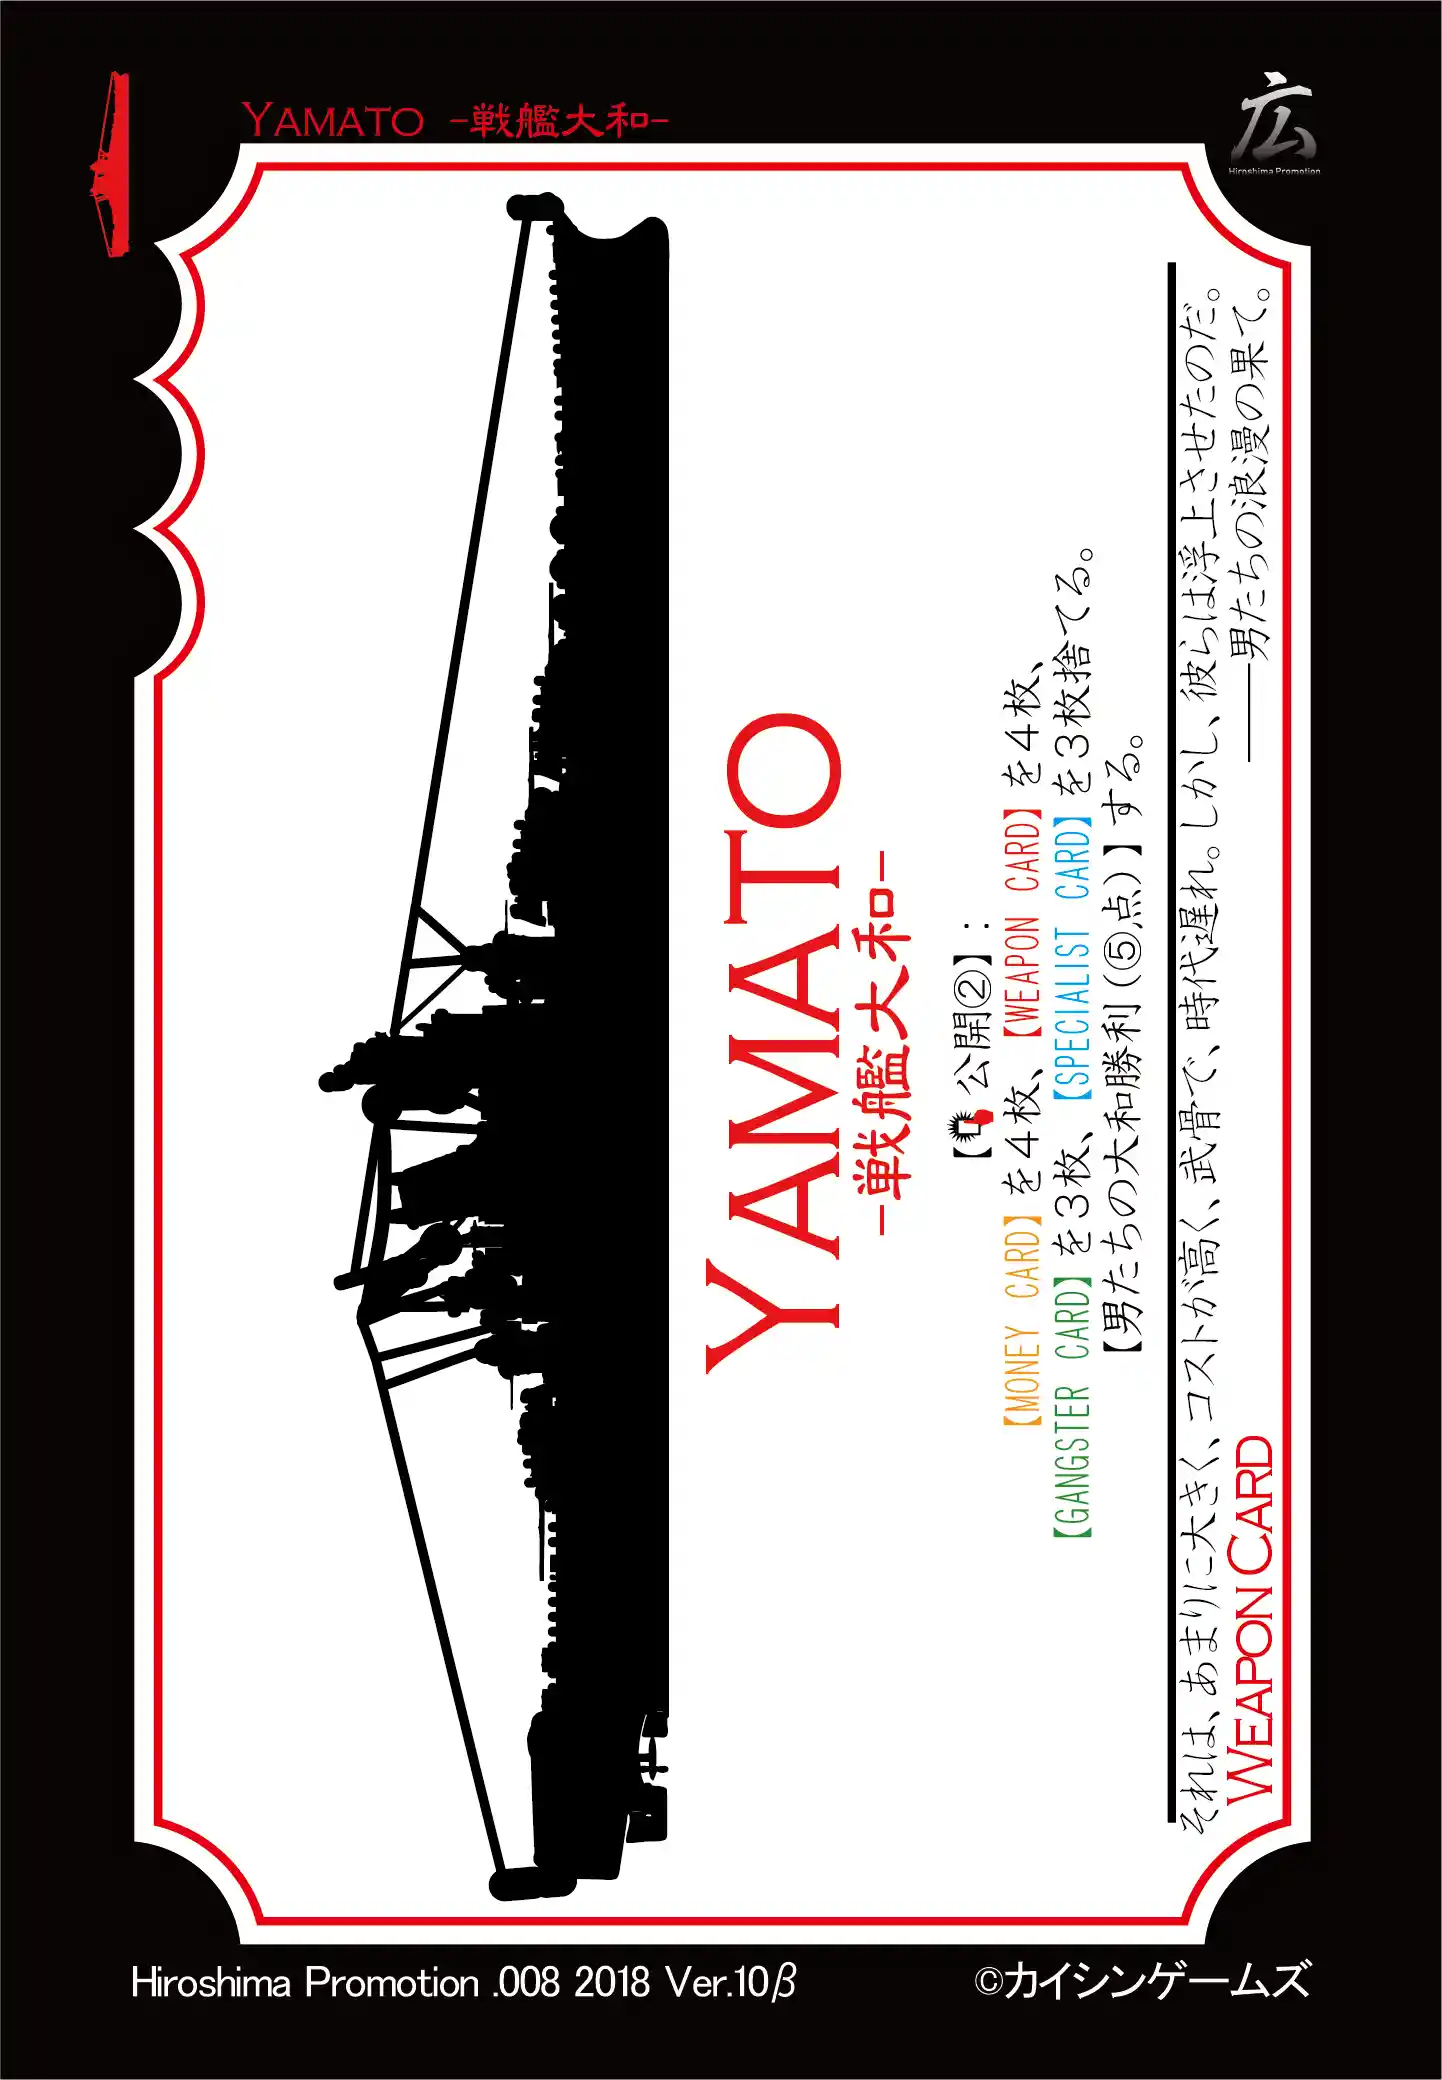 HiPr.008.Yamato.png